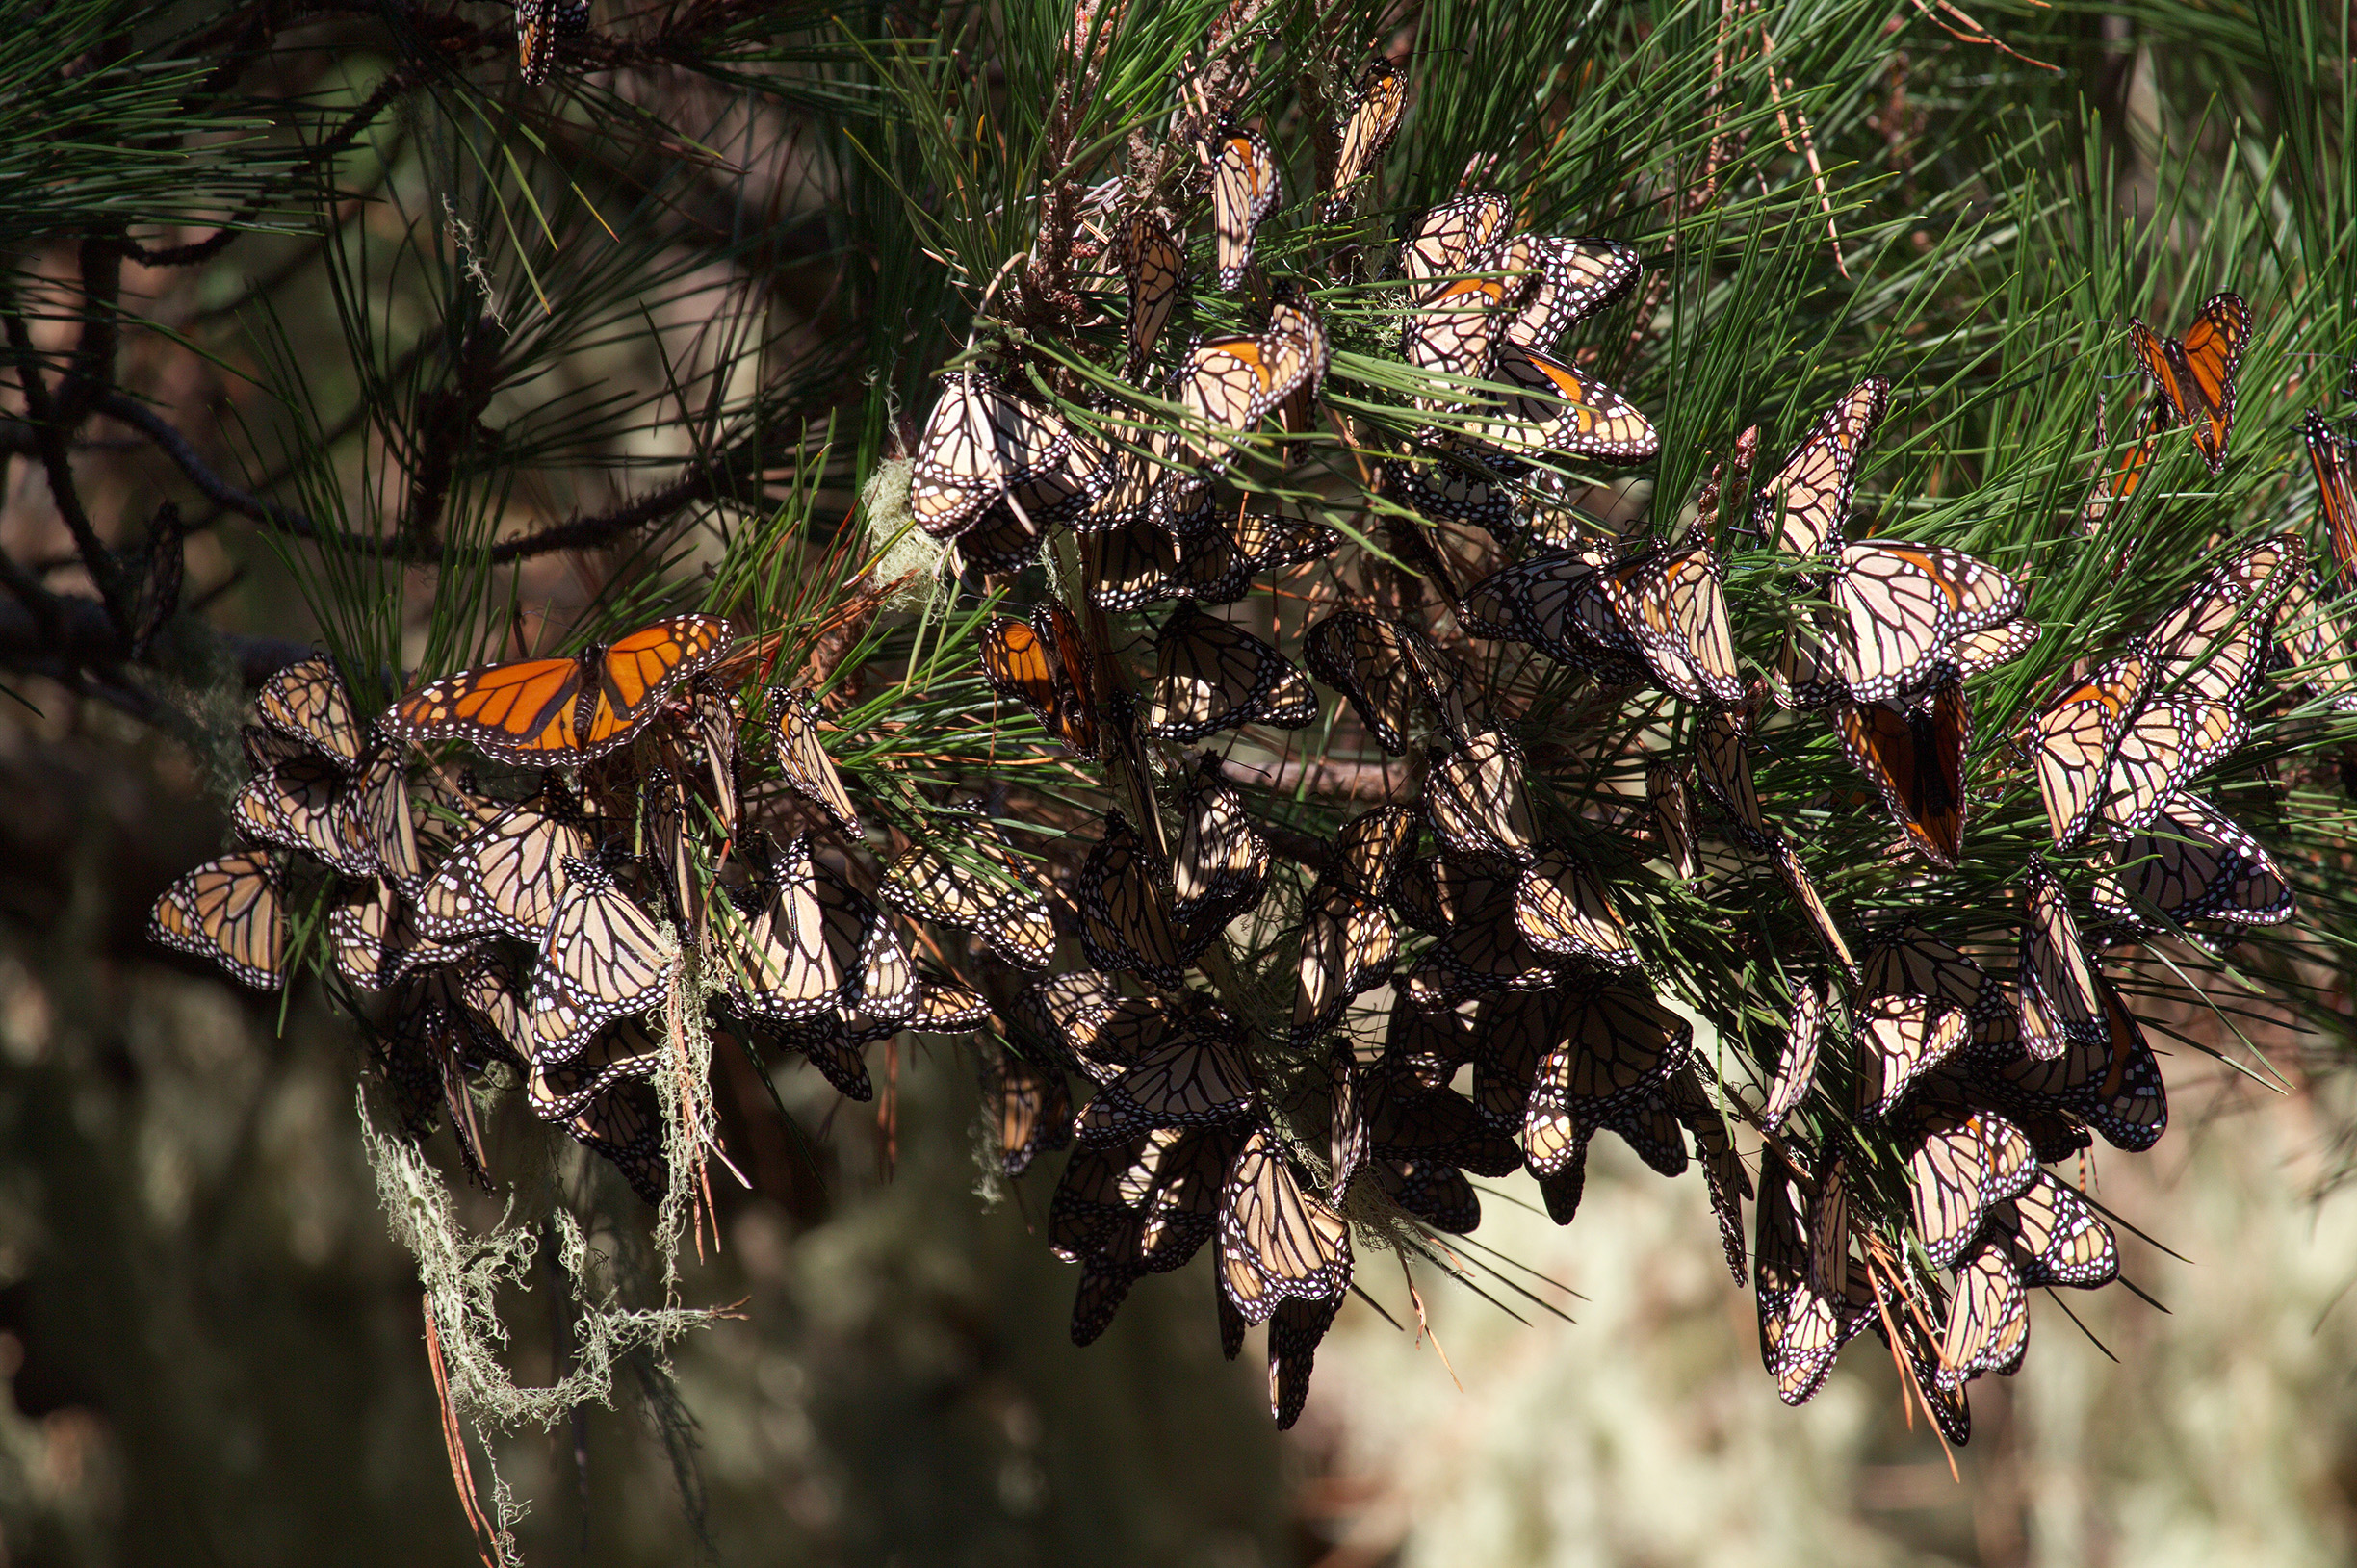 "Monarchs in western North America, the population that overwinters in California, have declined dramatically in recent years. This photo was taken in 2010 at Point Lobos. The trees in many overwintering sites are now bare of butterflies. (Photo: Xerces Society / Candace Fallon.)"